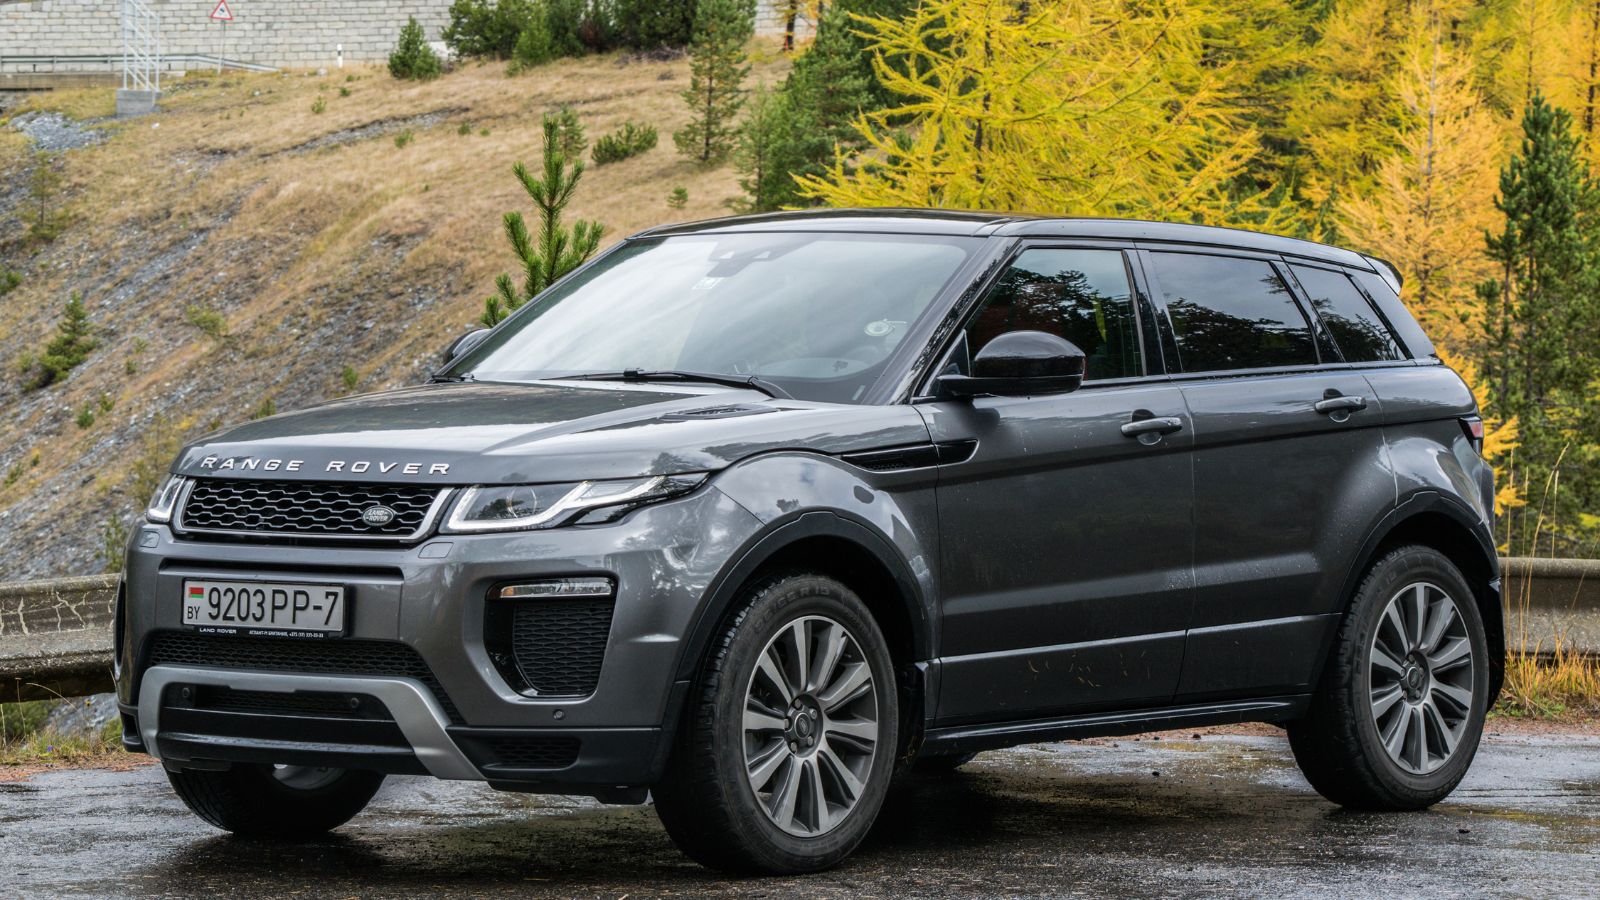 <p>Another luxury SUV to avoid, this iconic status symbol model isn’t worth the trouble. Indeed, <a href="https://cardealermagazine.co.uk/publish/land-rover-discovery-named-most-unreliable-used-car-but-citroen-is-worst-brand-overall/285721#:~:text=The%20Land%20Rover%20Discovery%20has,they%20thought%20of%20their%20cars.">CarDealer</a> says the brand produces the most unreliable used cars of all! Evoque owners have reported numerous problems, including engine failures, suspension problems, and glitchy infotainment systems. They’re also notorious for being expensive to service.</p>